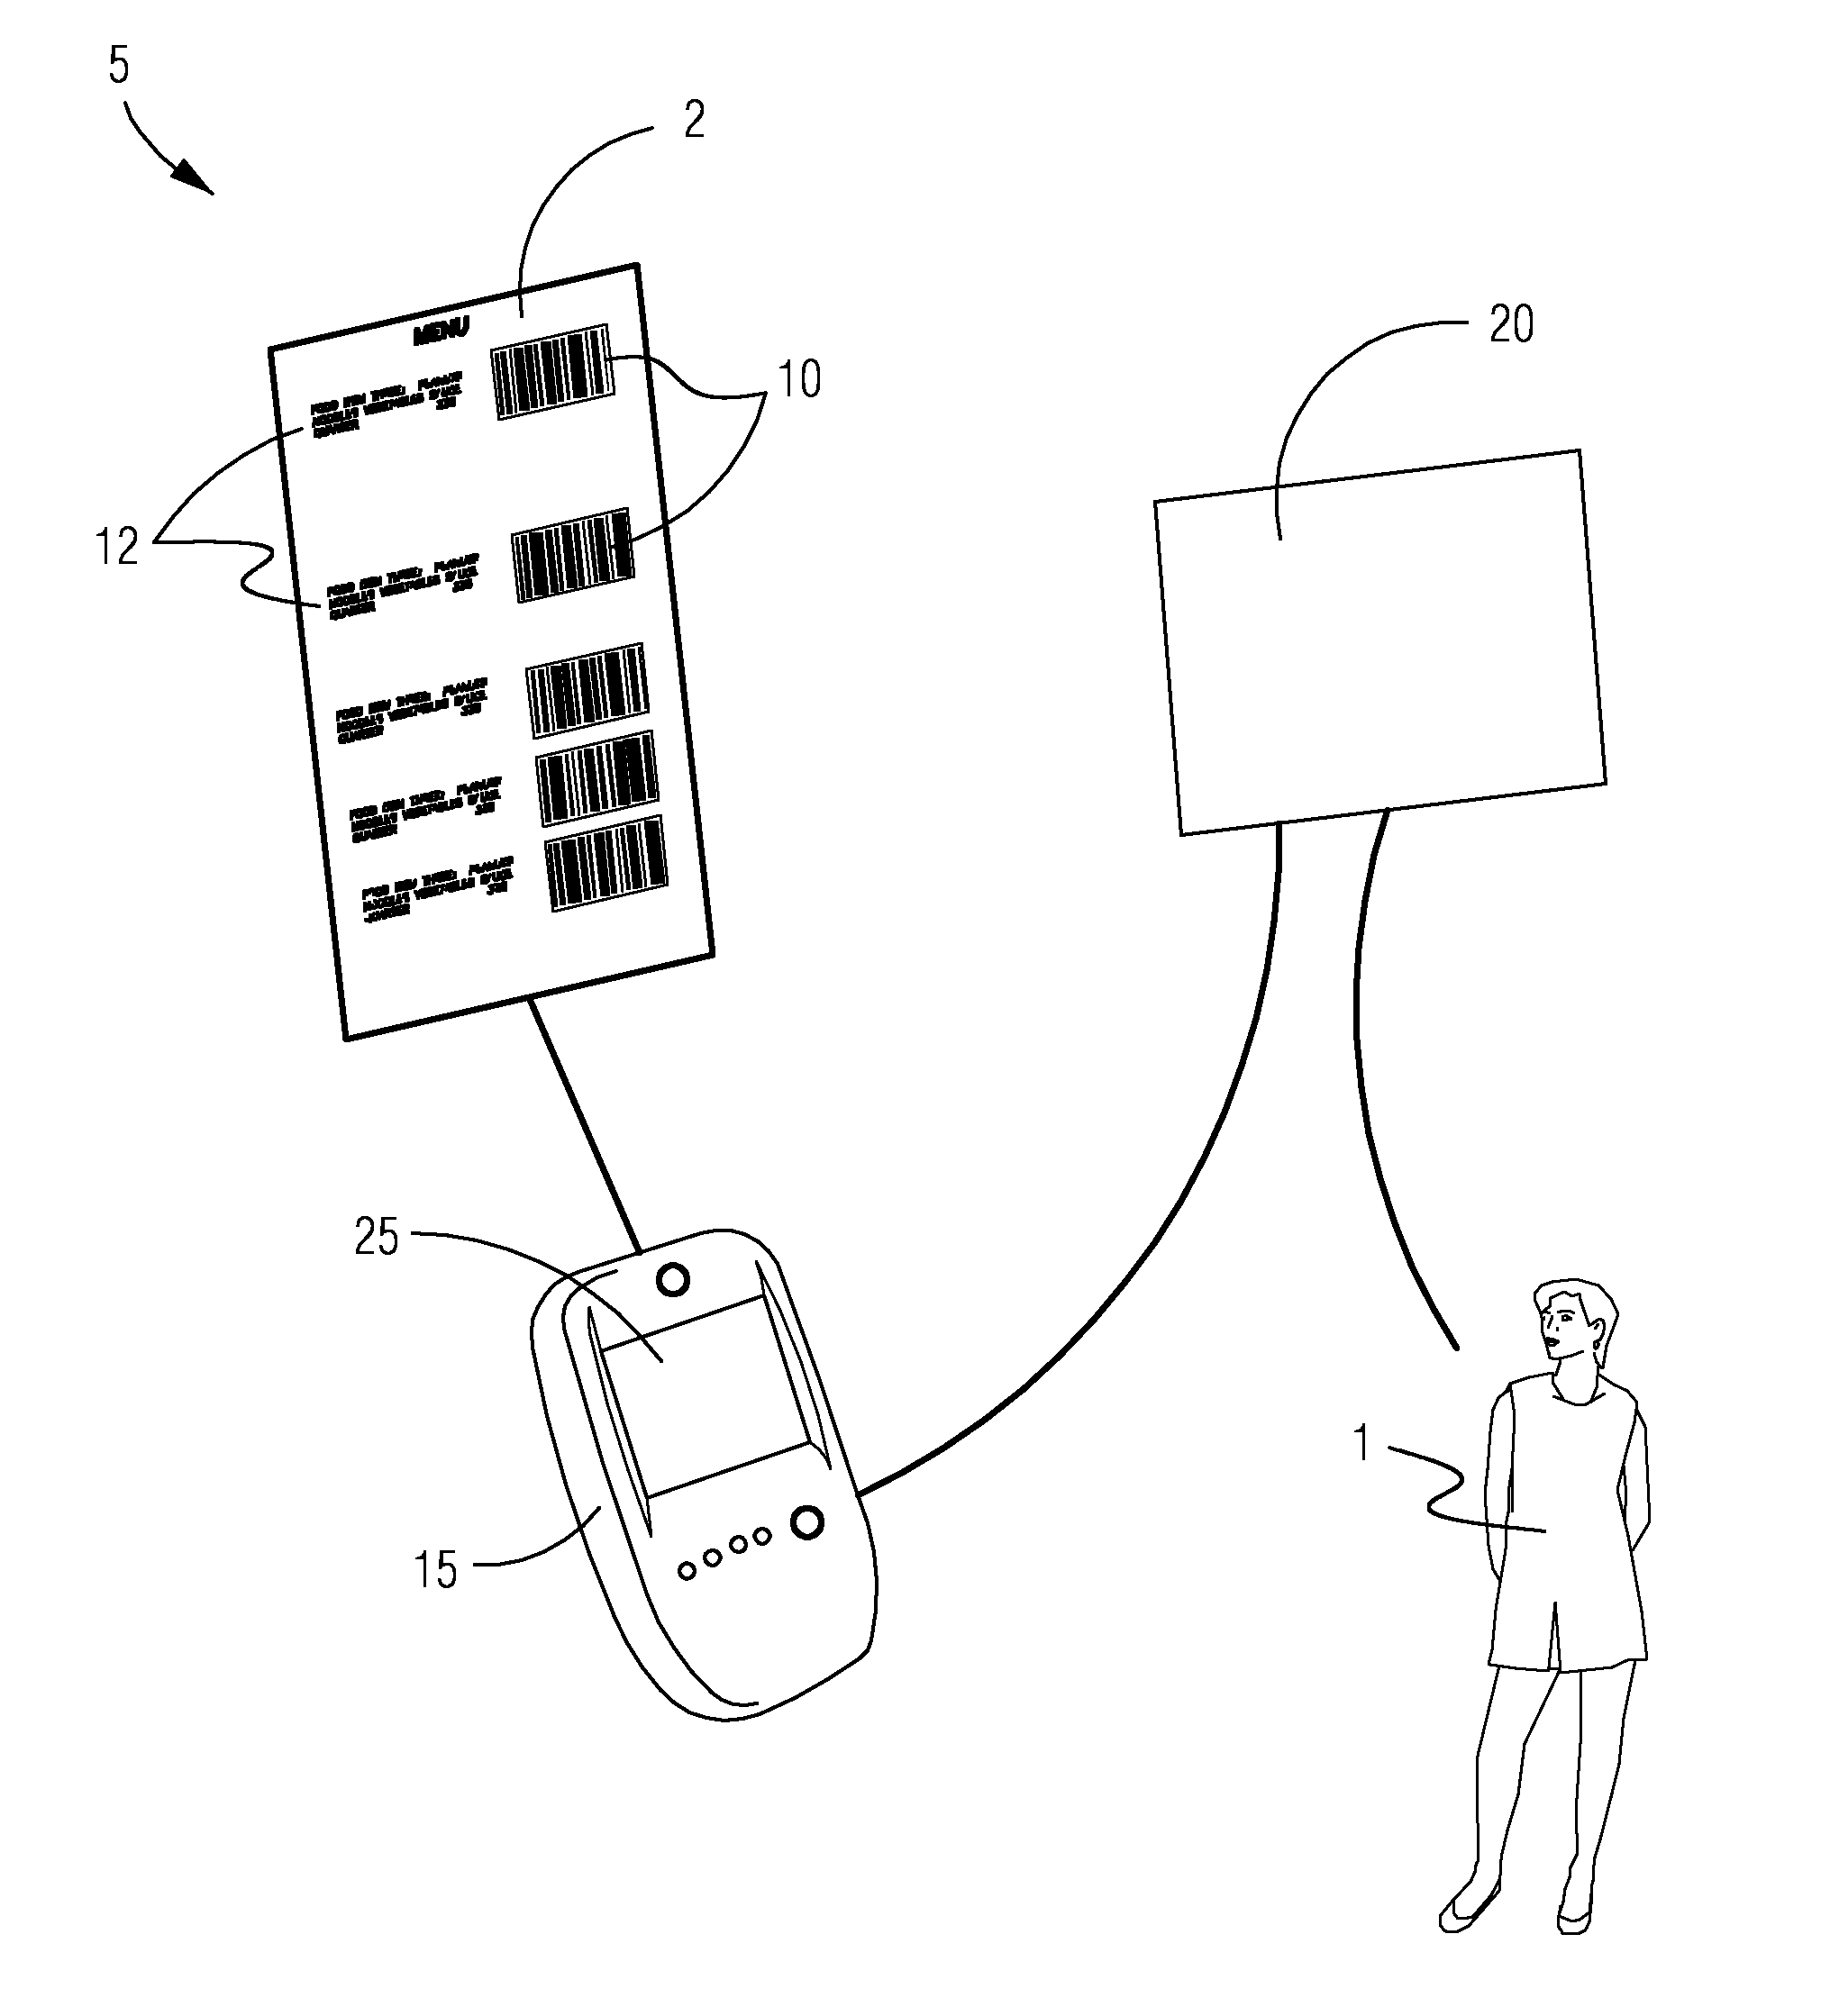 Device and method to monitor carbohydrate loads for diabetics using a bar code scanner and dosing insulin